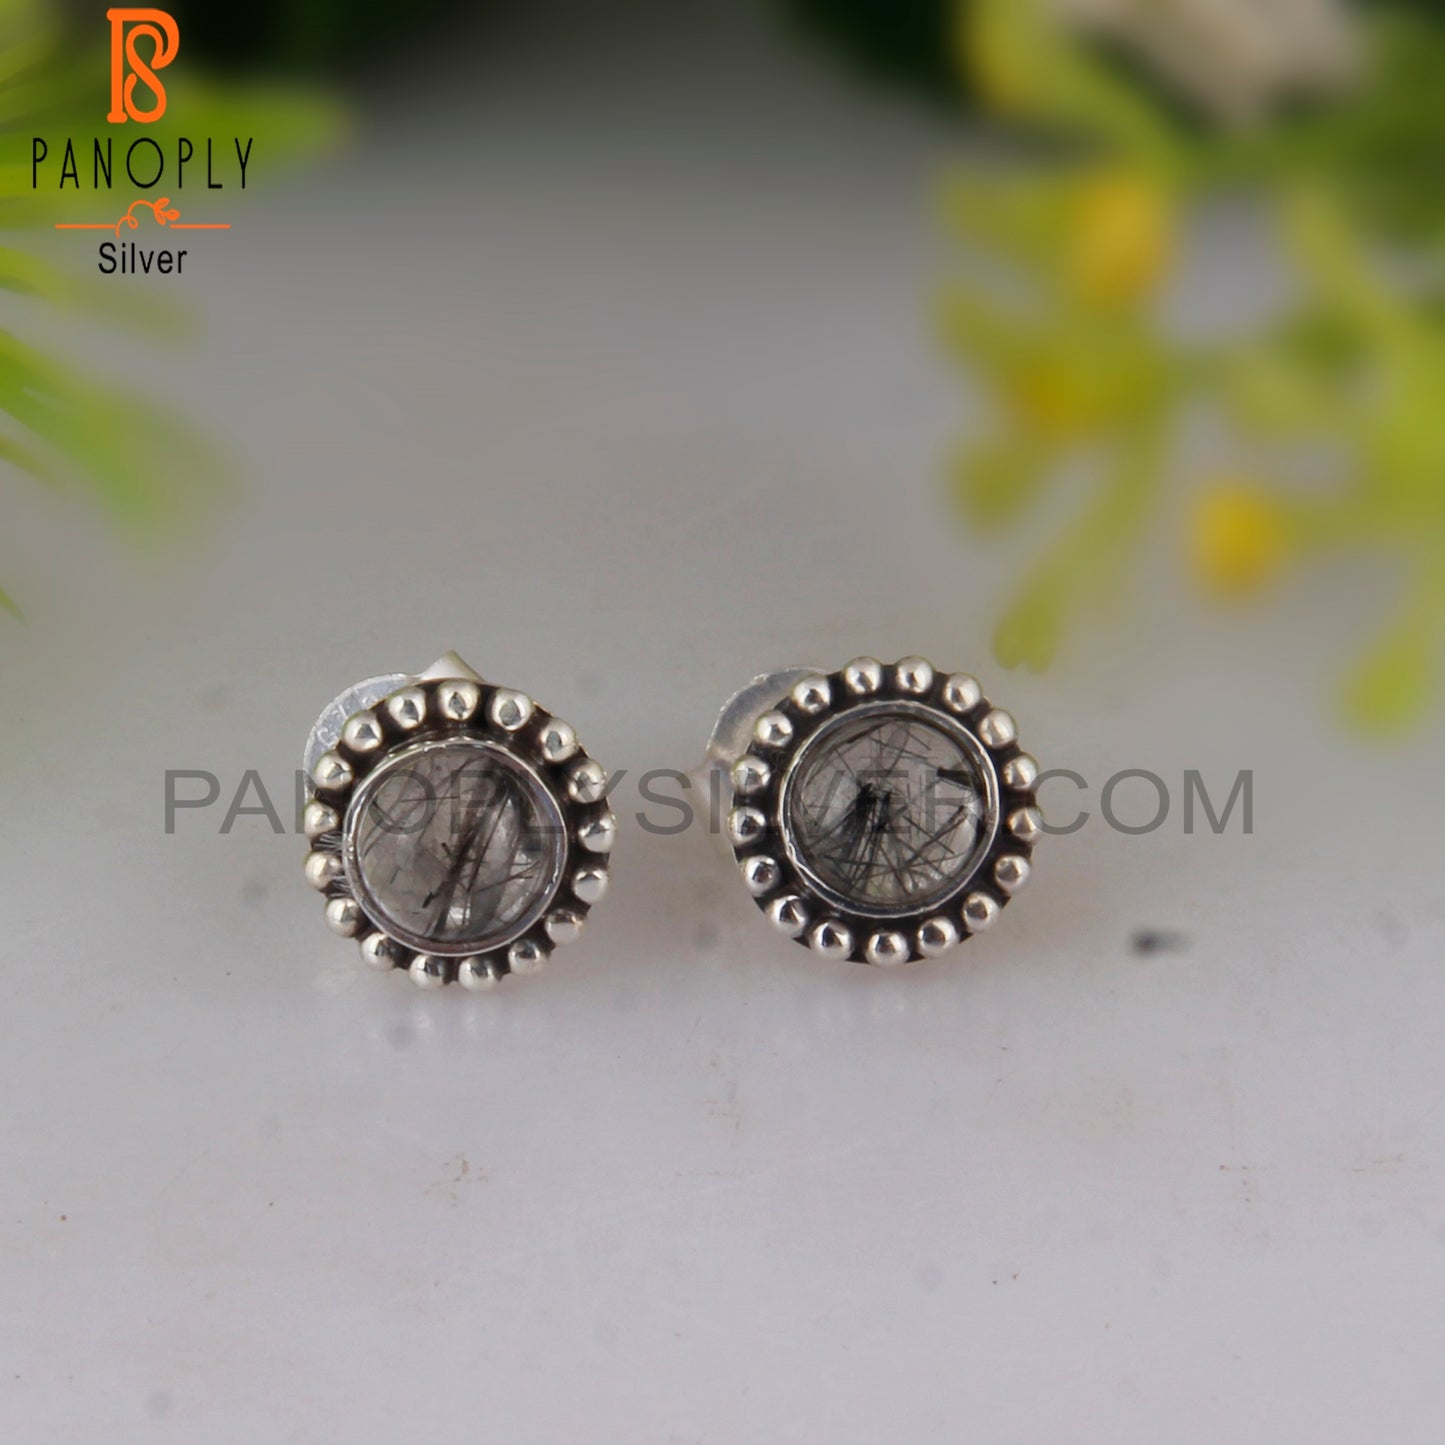 Black Rutile Round Sterling Silver Studs Engagement Earrings